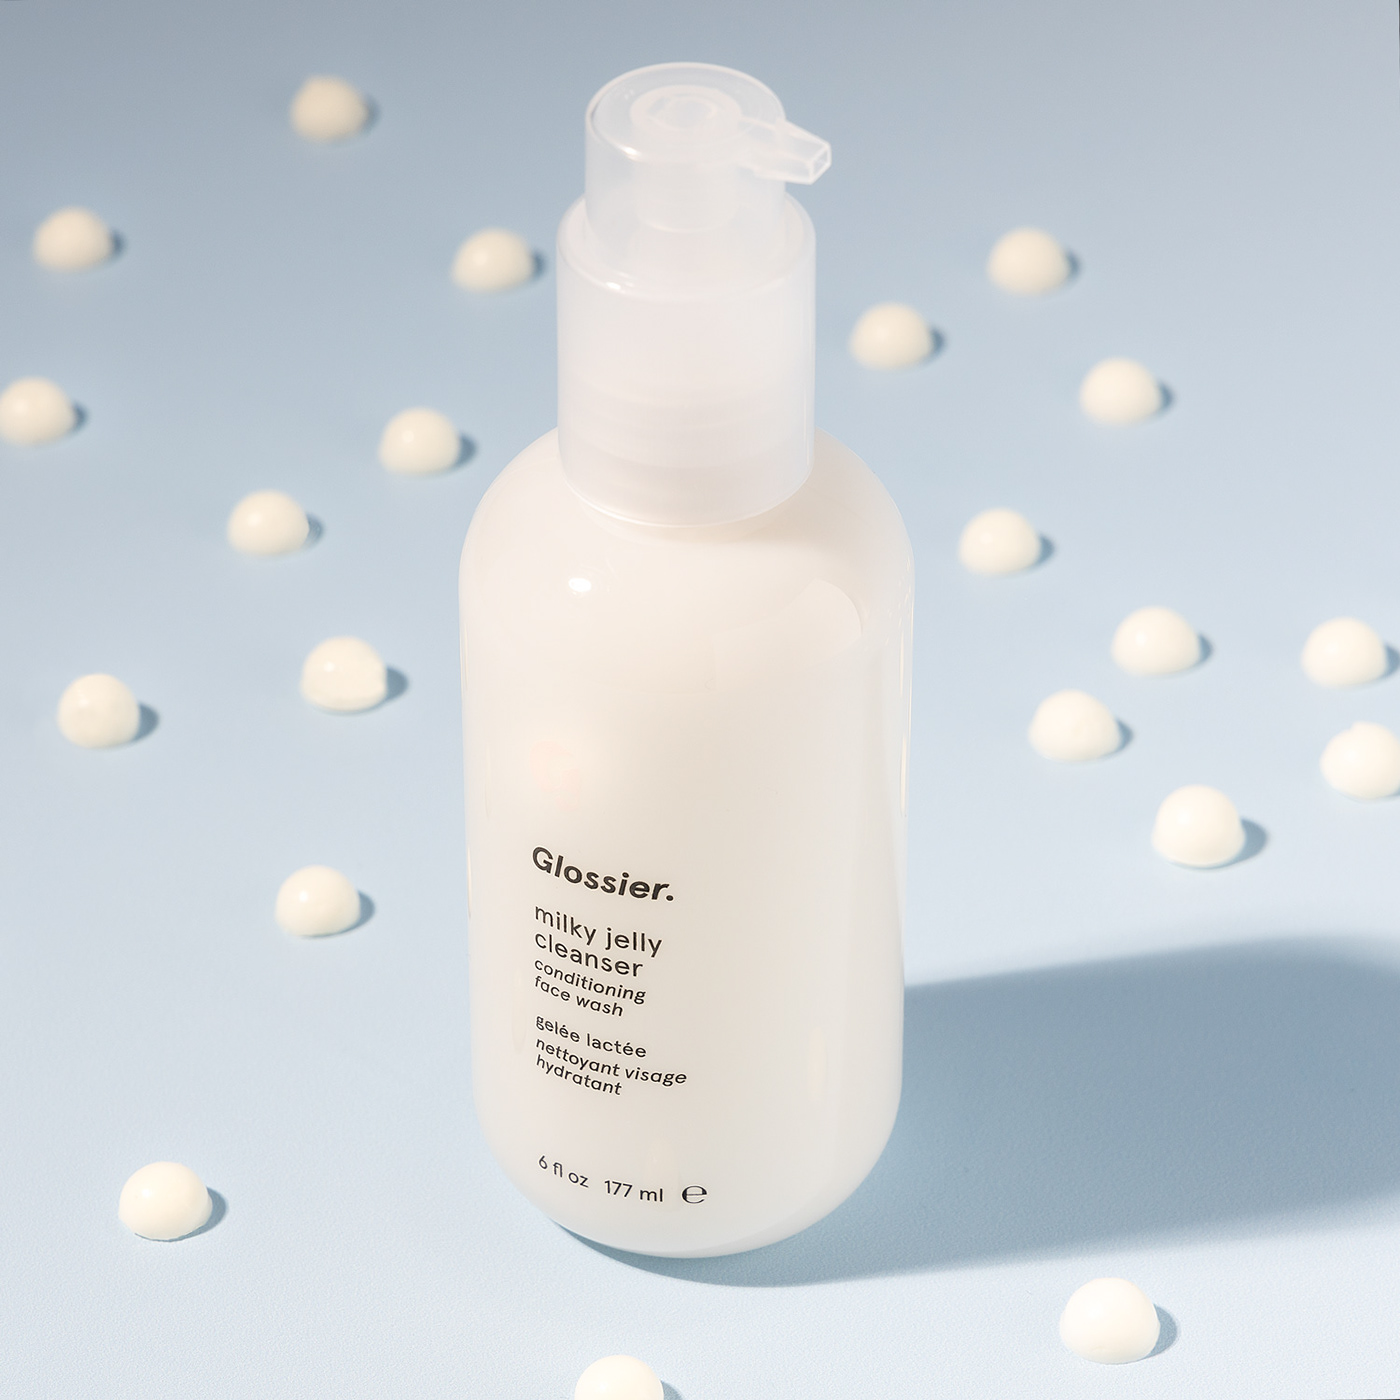 Milky Jelly Cleanser Glossier Art Directed Photoshoot By Mansellmade